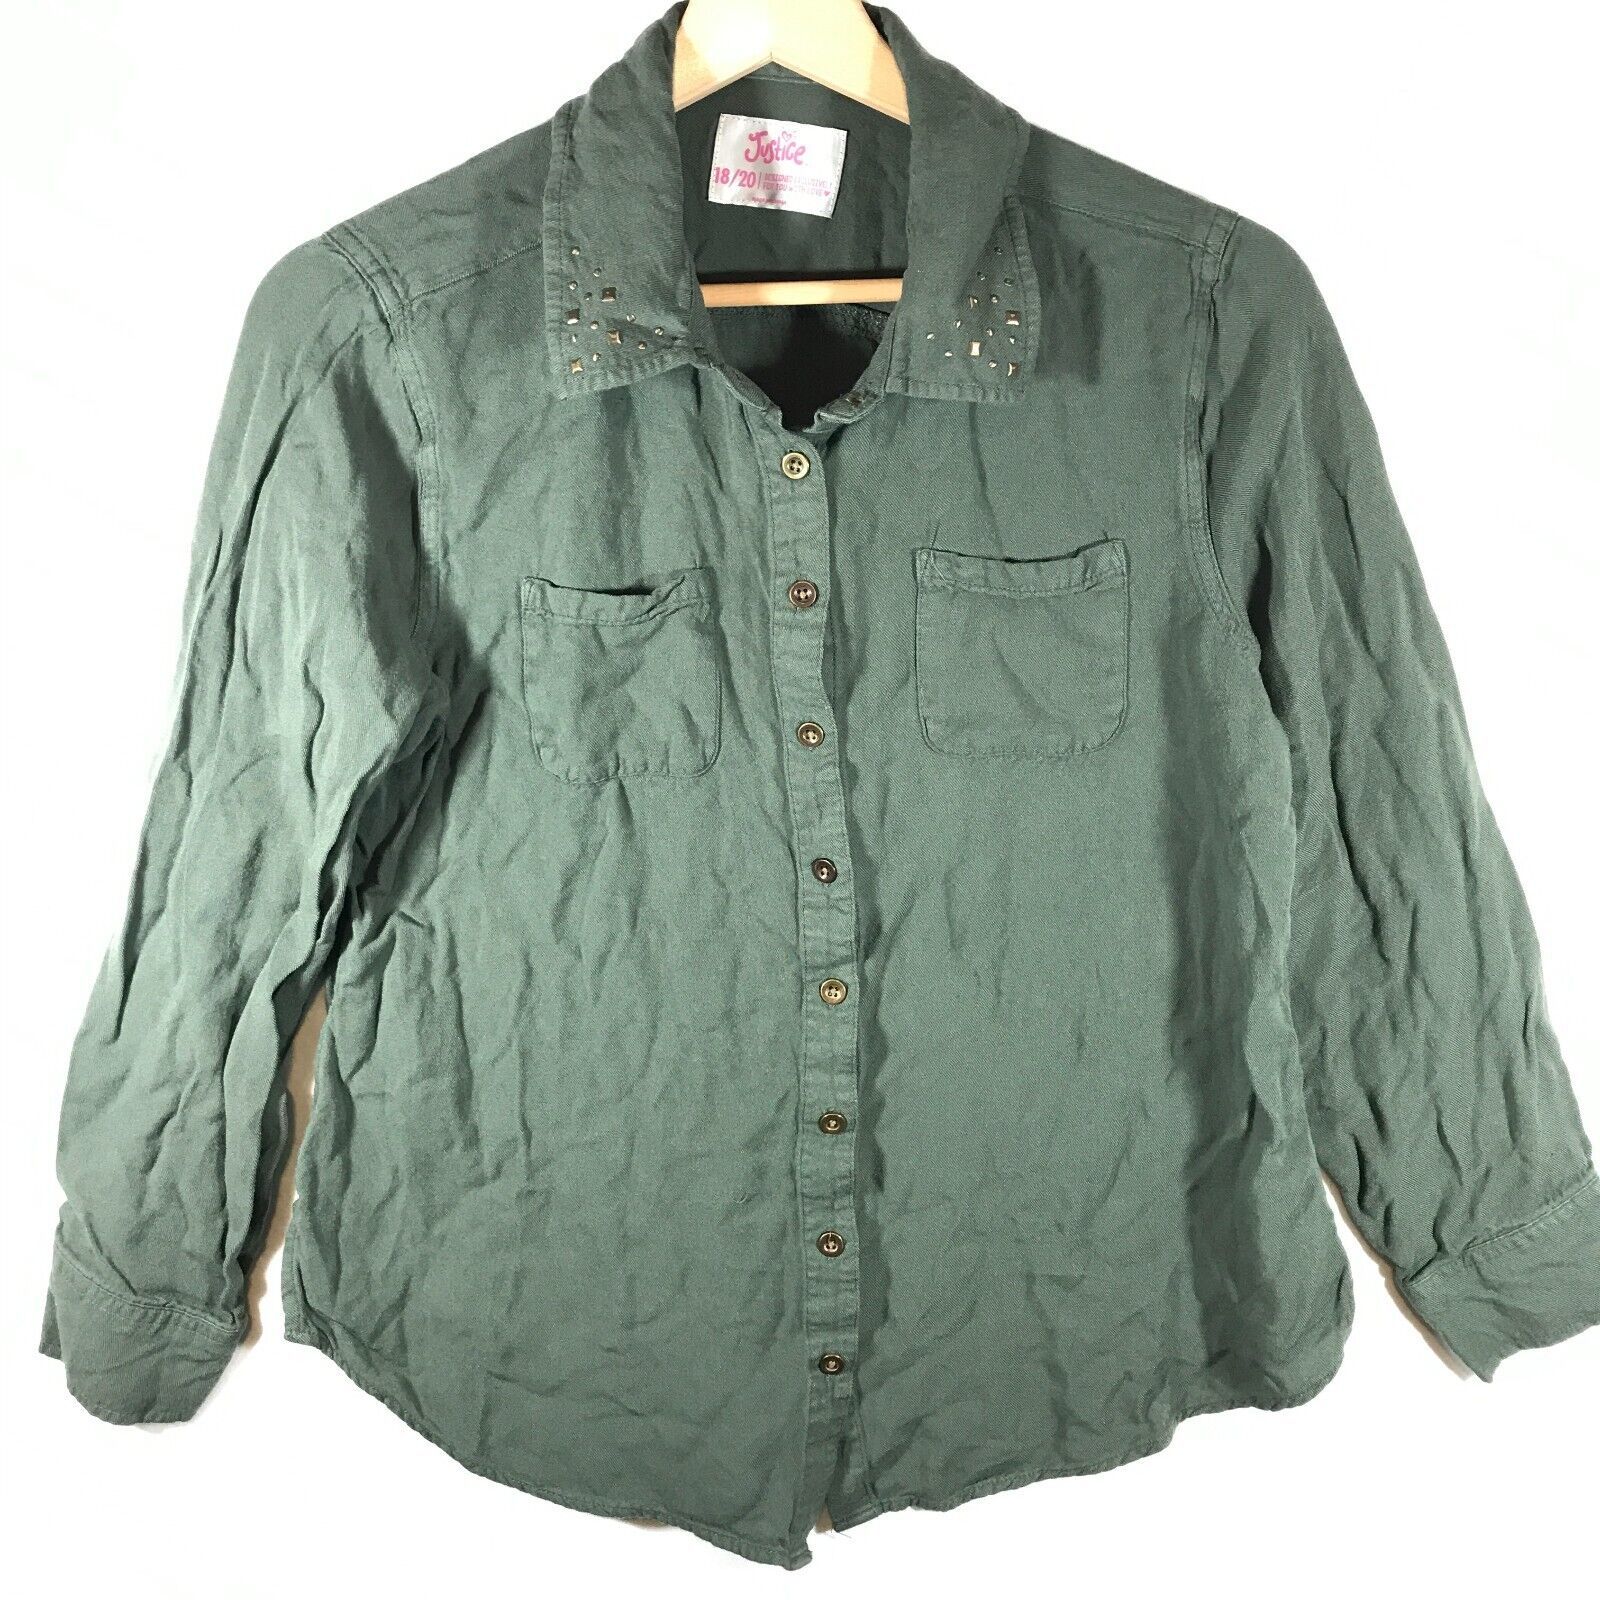 Justice Top Girl's 18/20 Green Studded Collar Button Up - $5.96